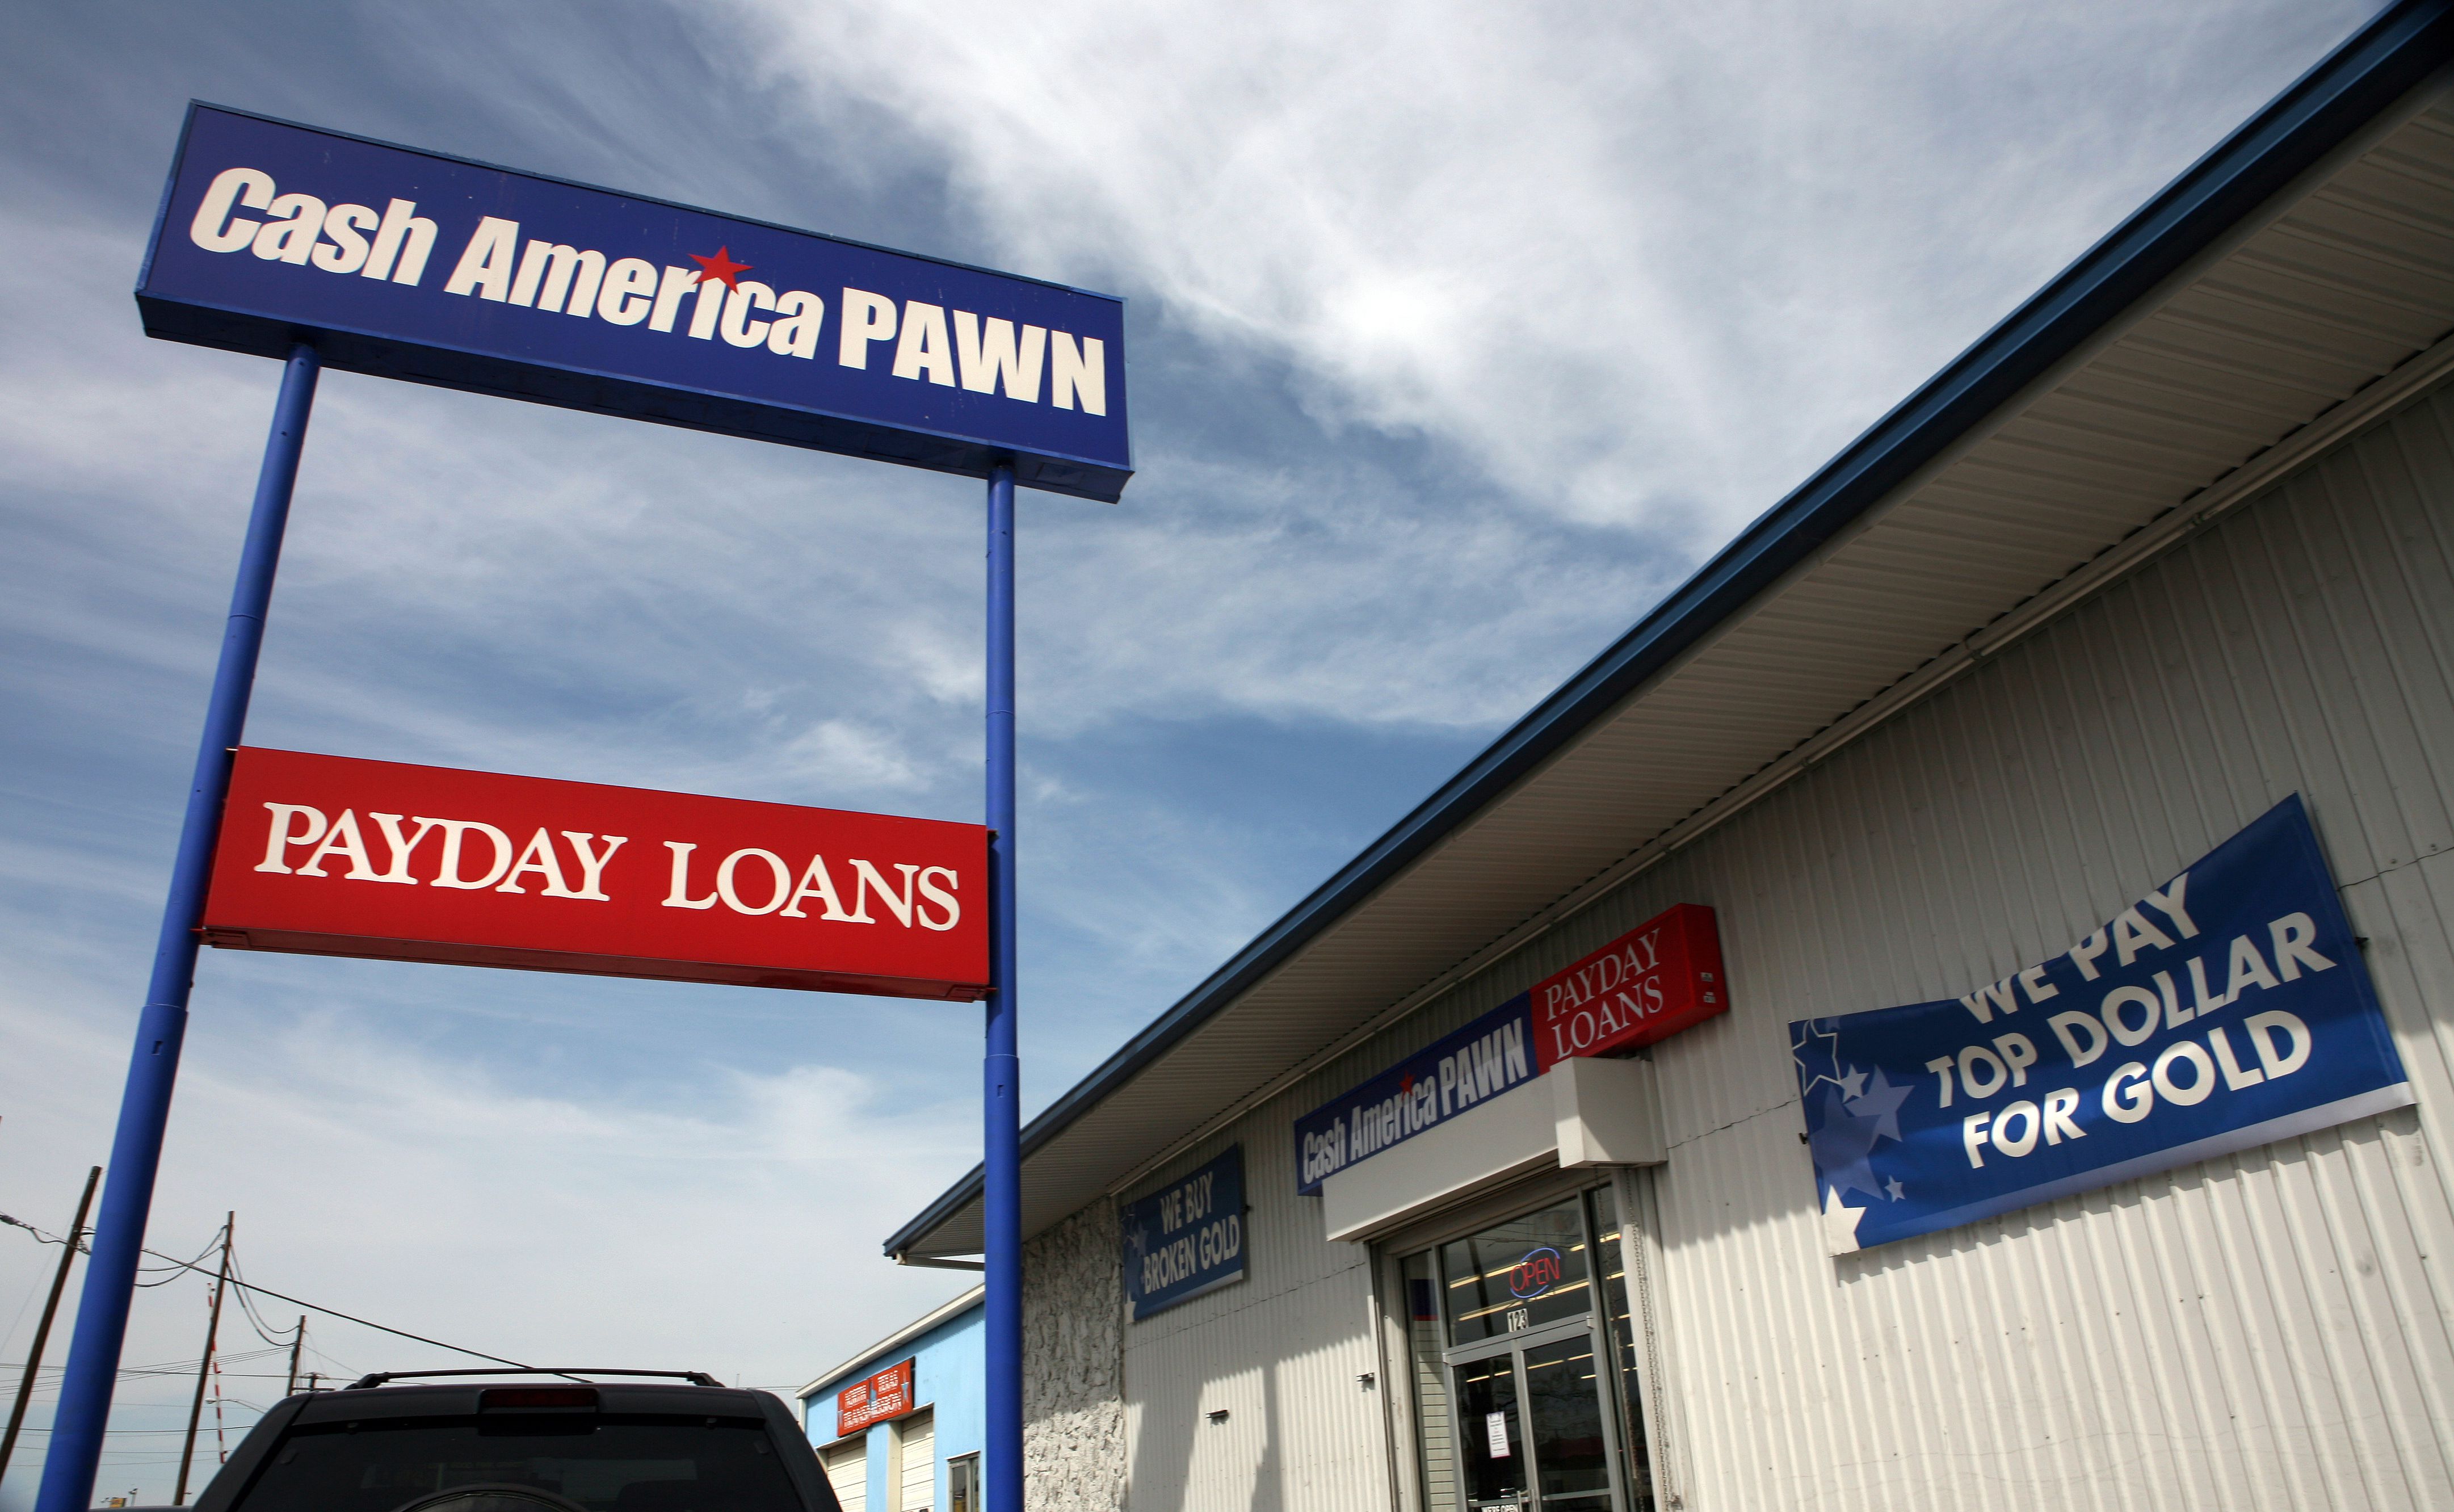 Why Payday Loans and Cash Advance Are So Bad